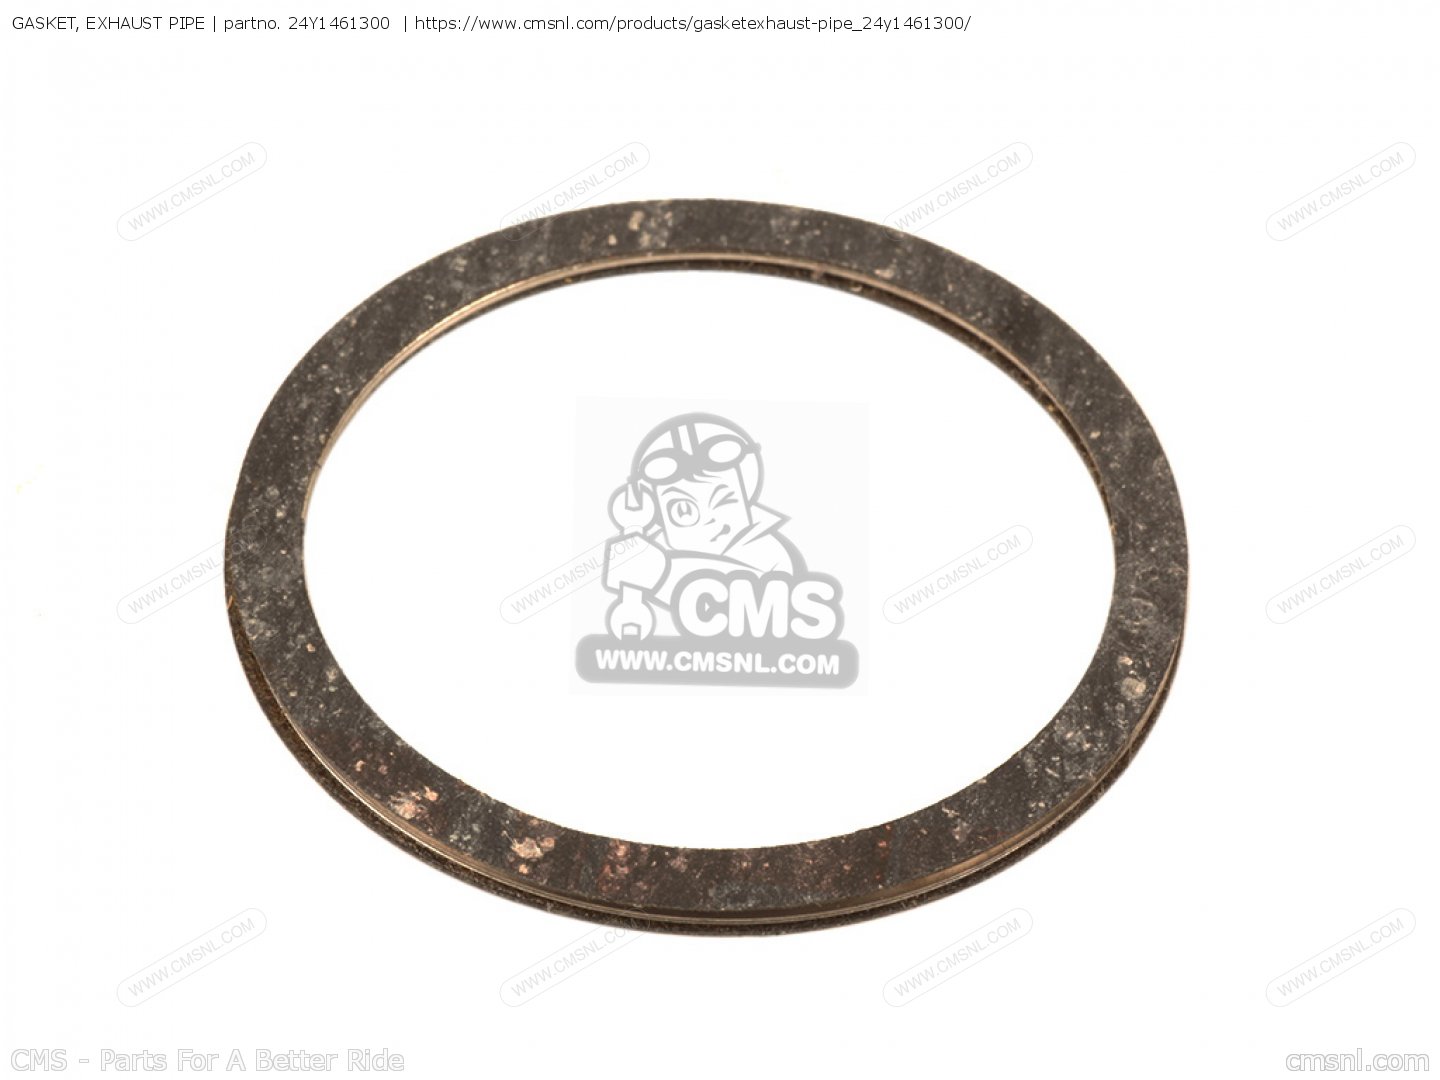 GASKET, EXHAUST PIPE for YZ250 1985 (F) USA - order at CMSNL